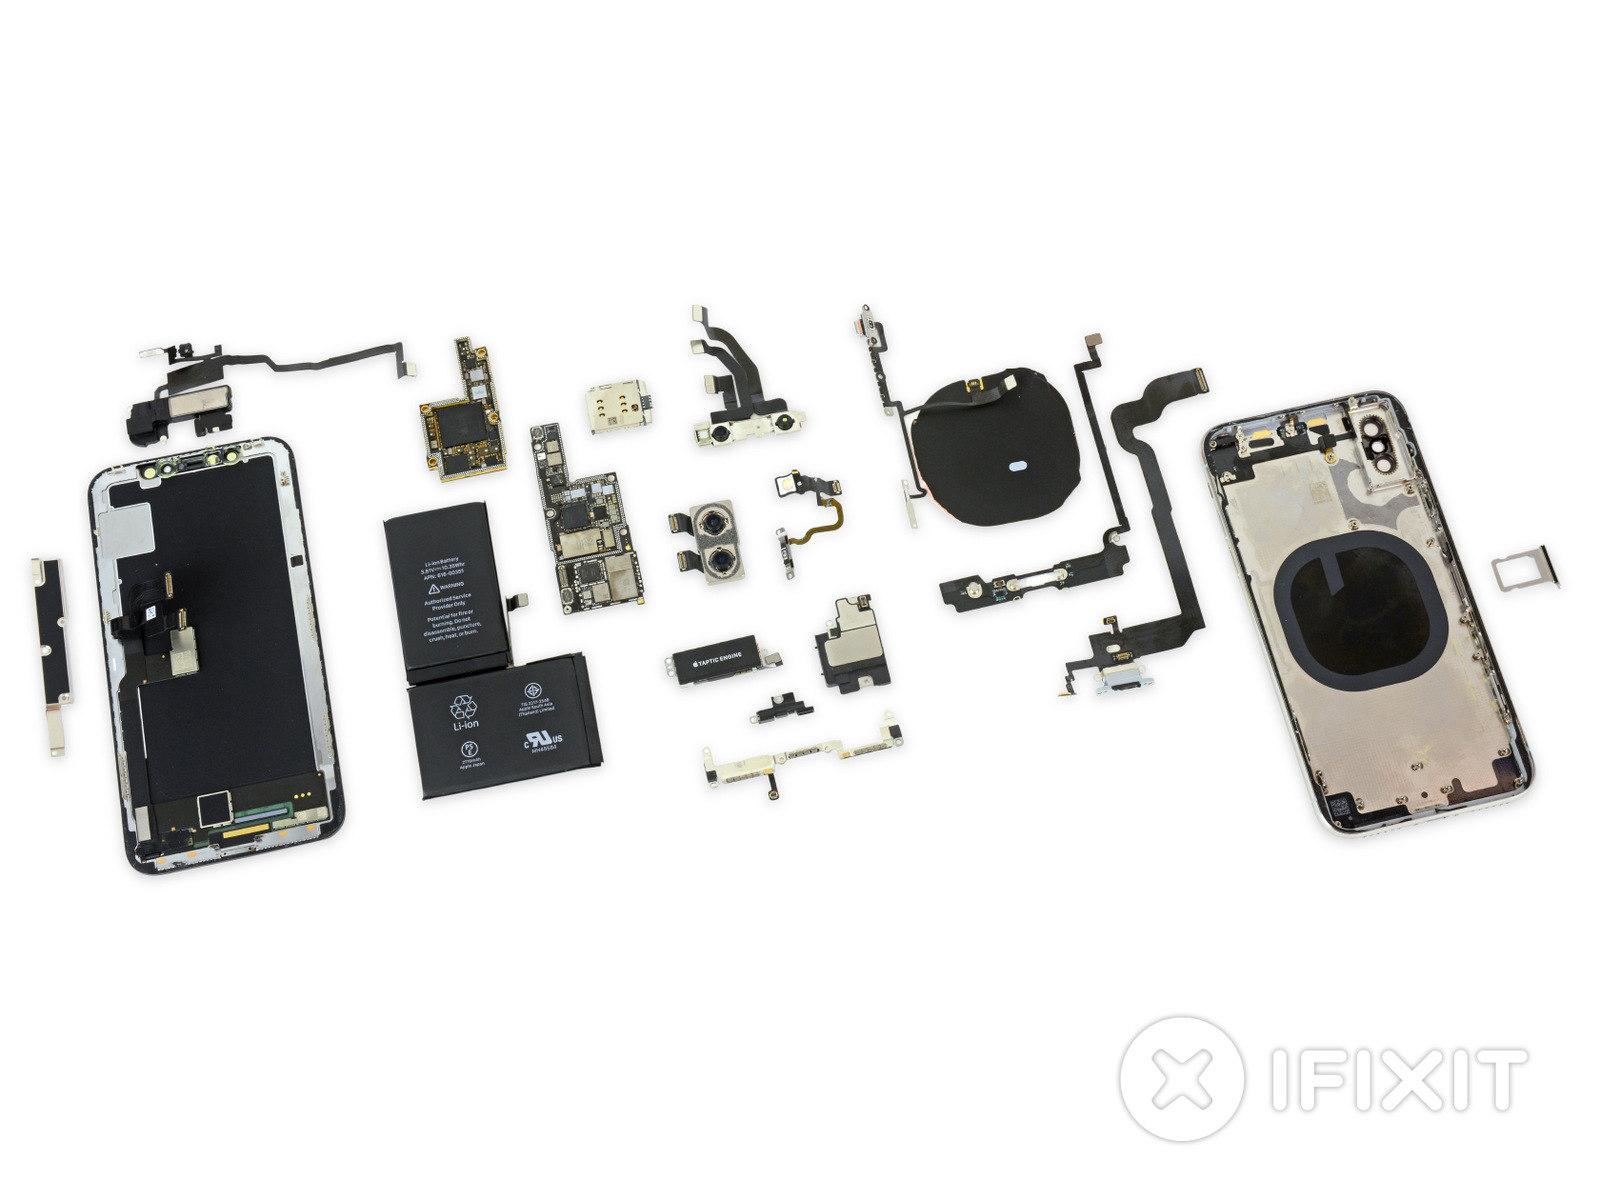 iPhone X Teardown Finds More Battery Power Than The iPhone 8 Plus